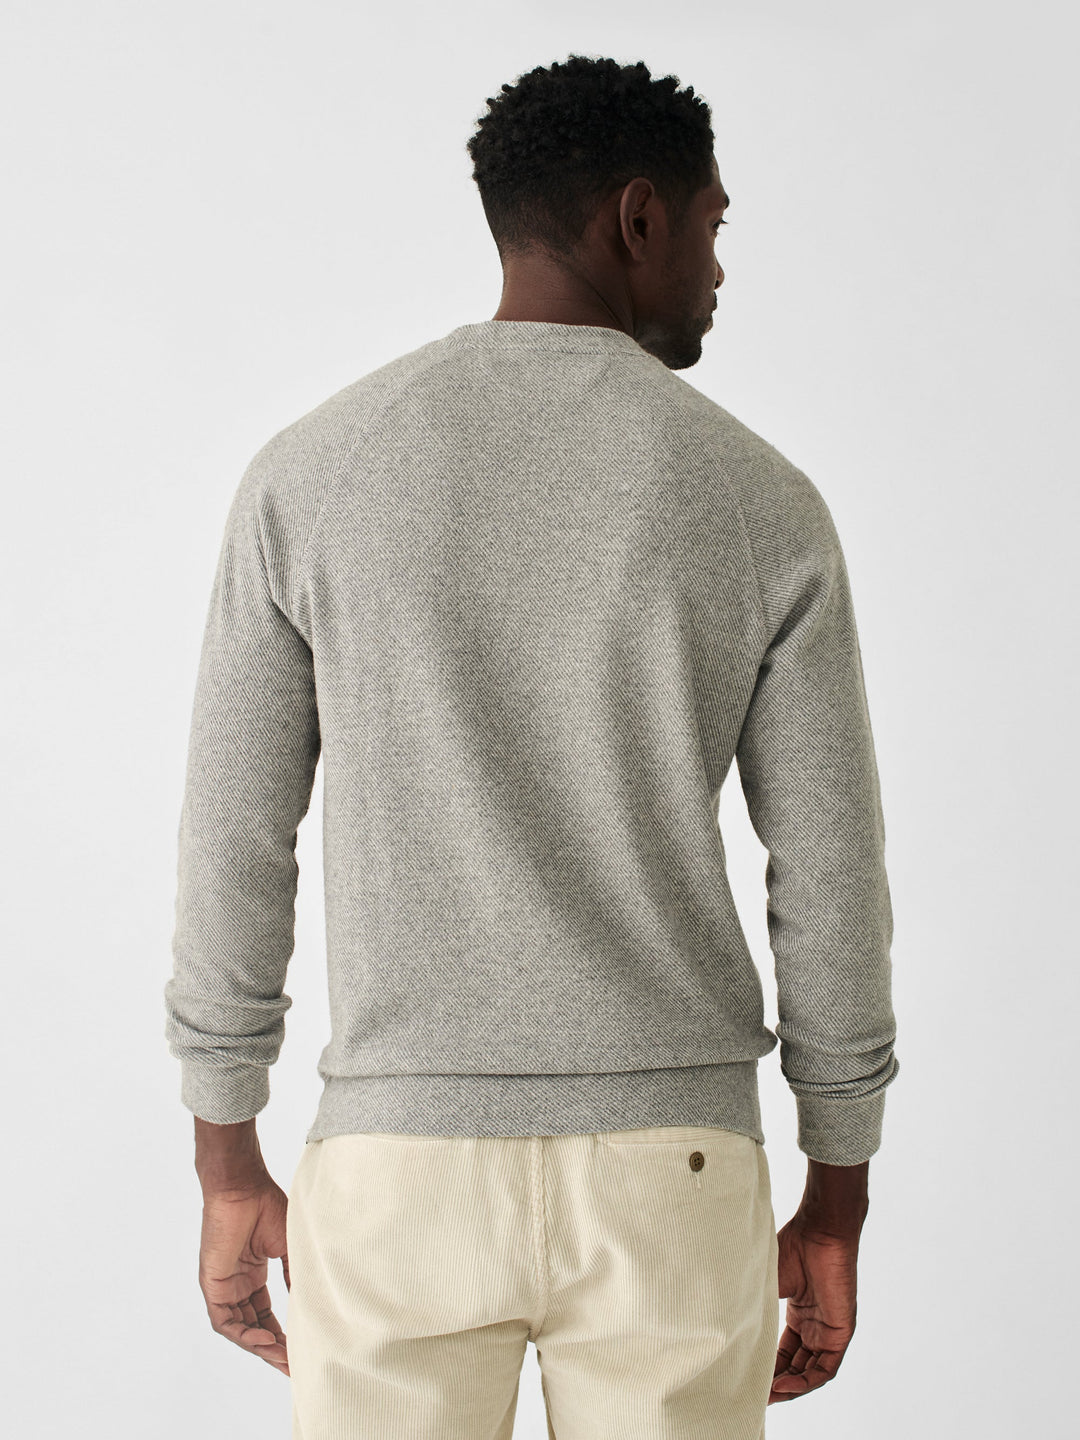 LEGEND CREW SWEATER-FOSSIL GREY TWILL - Kingfisher Road - Online Boutique